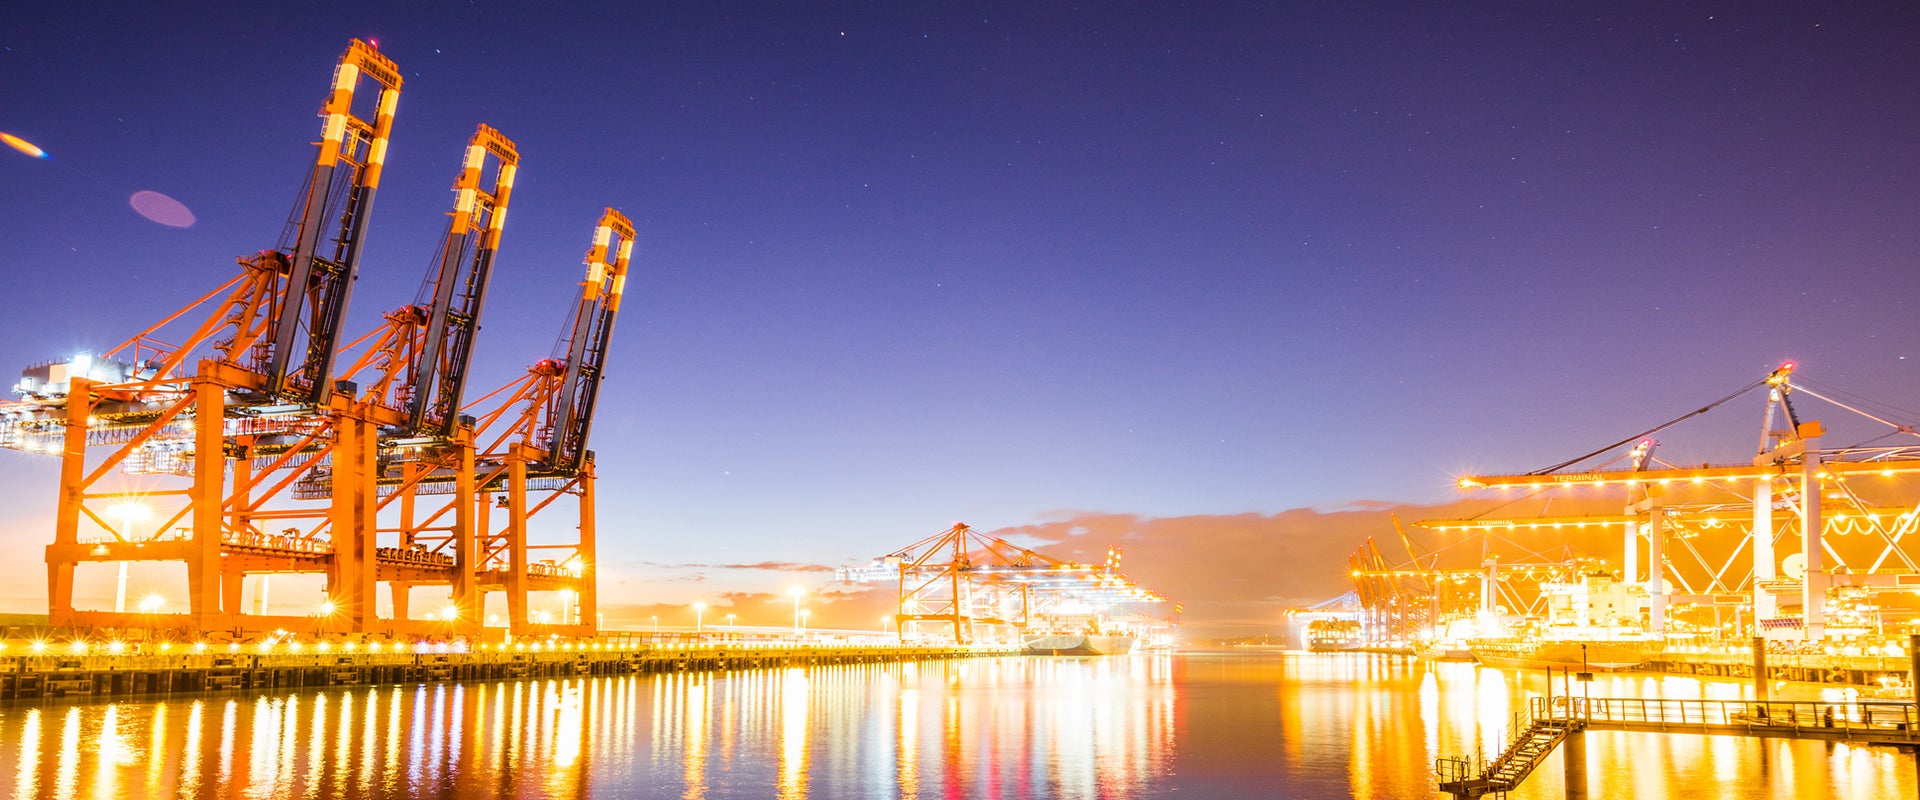 Why the Timing Is Right for Port Infrastructure Investments in Brazil